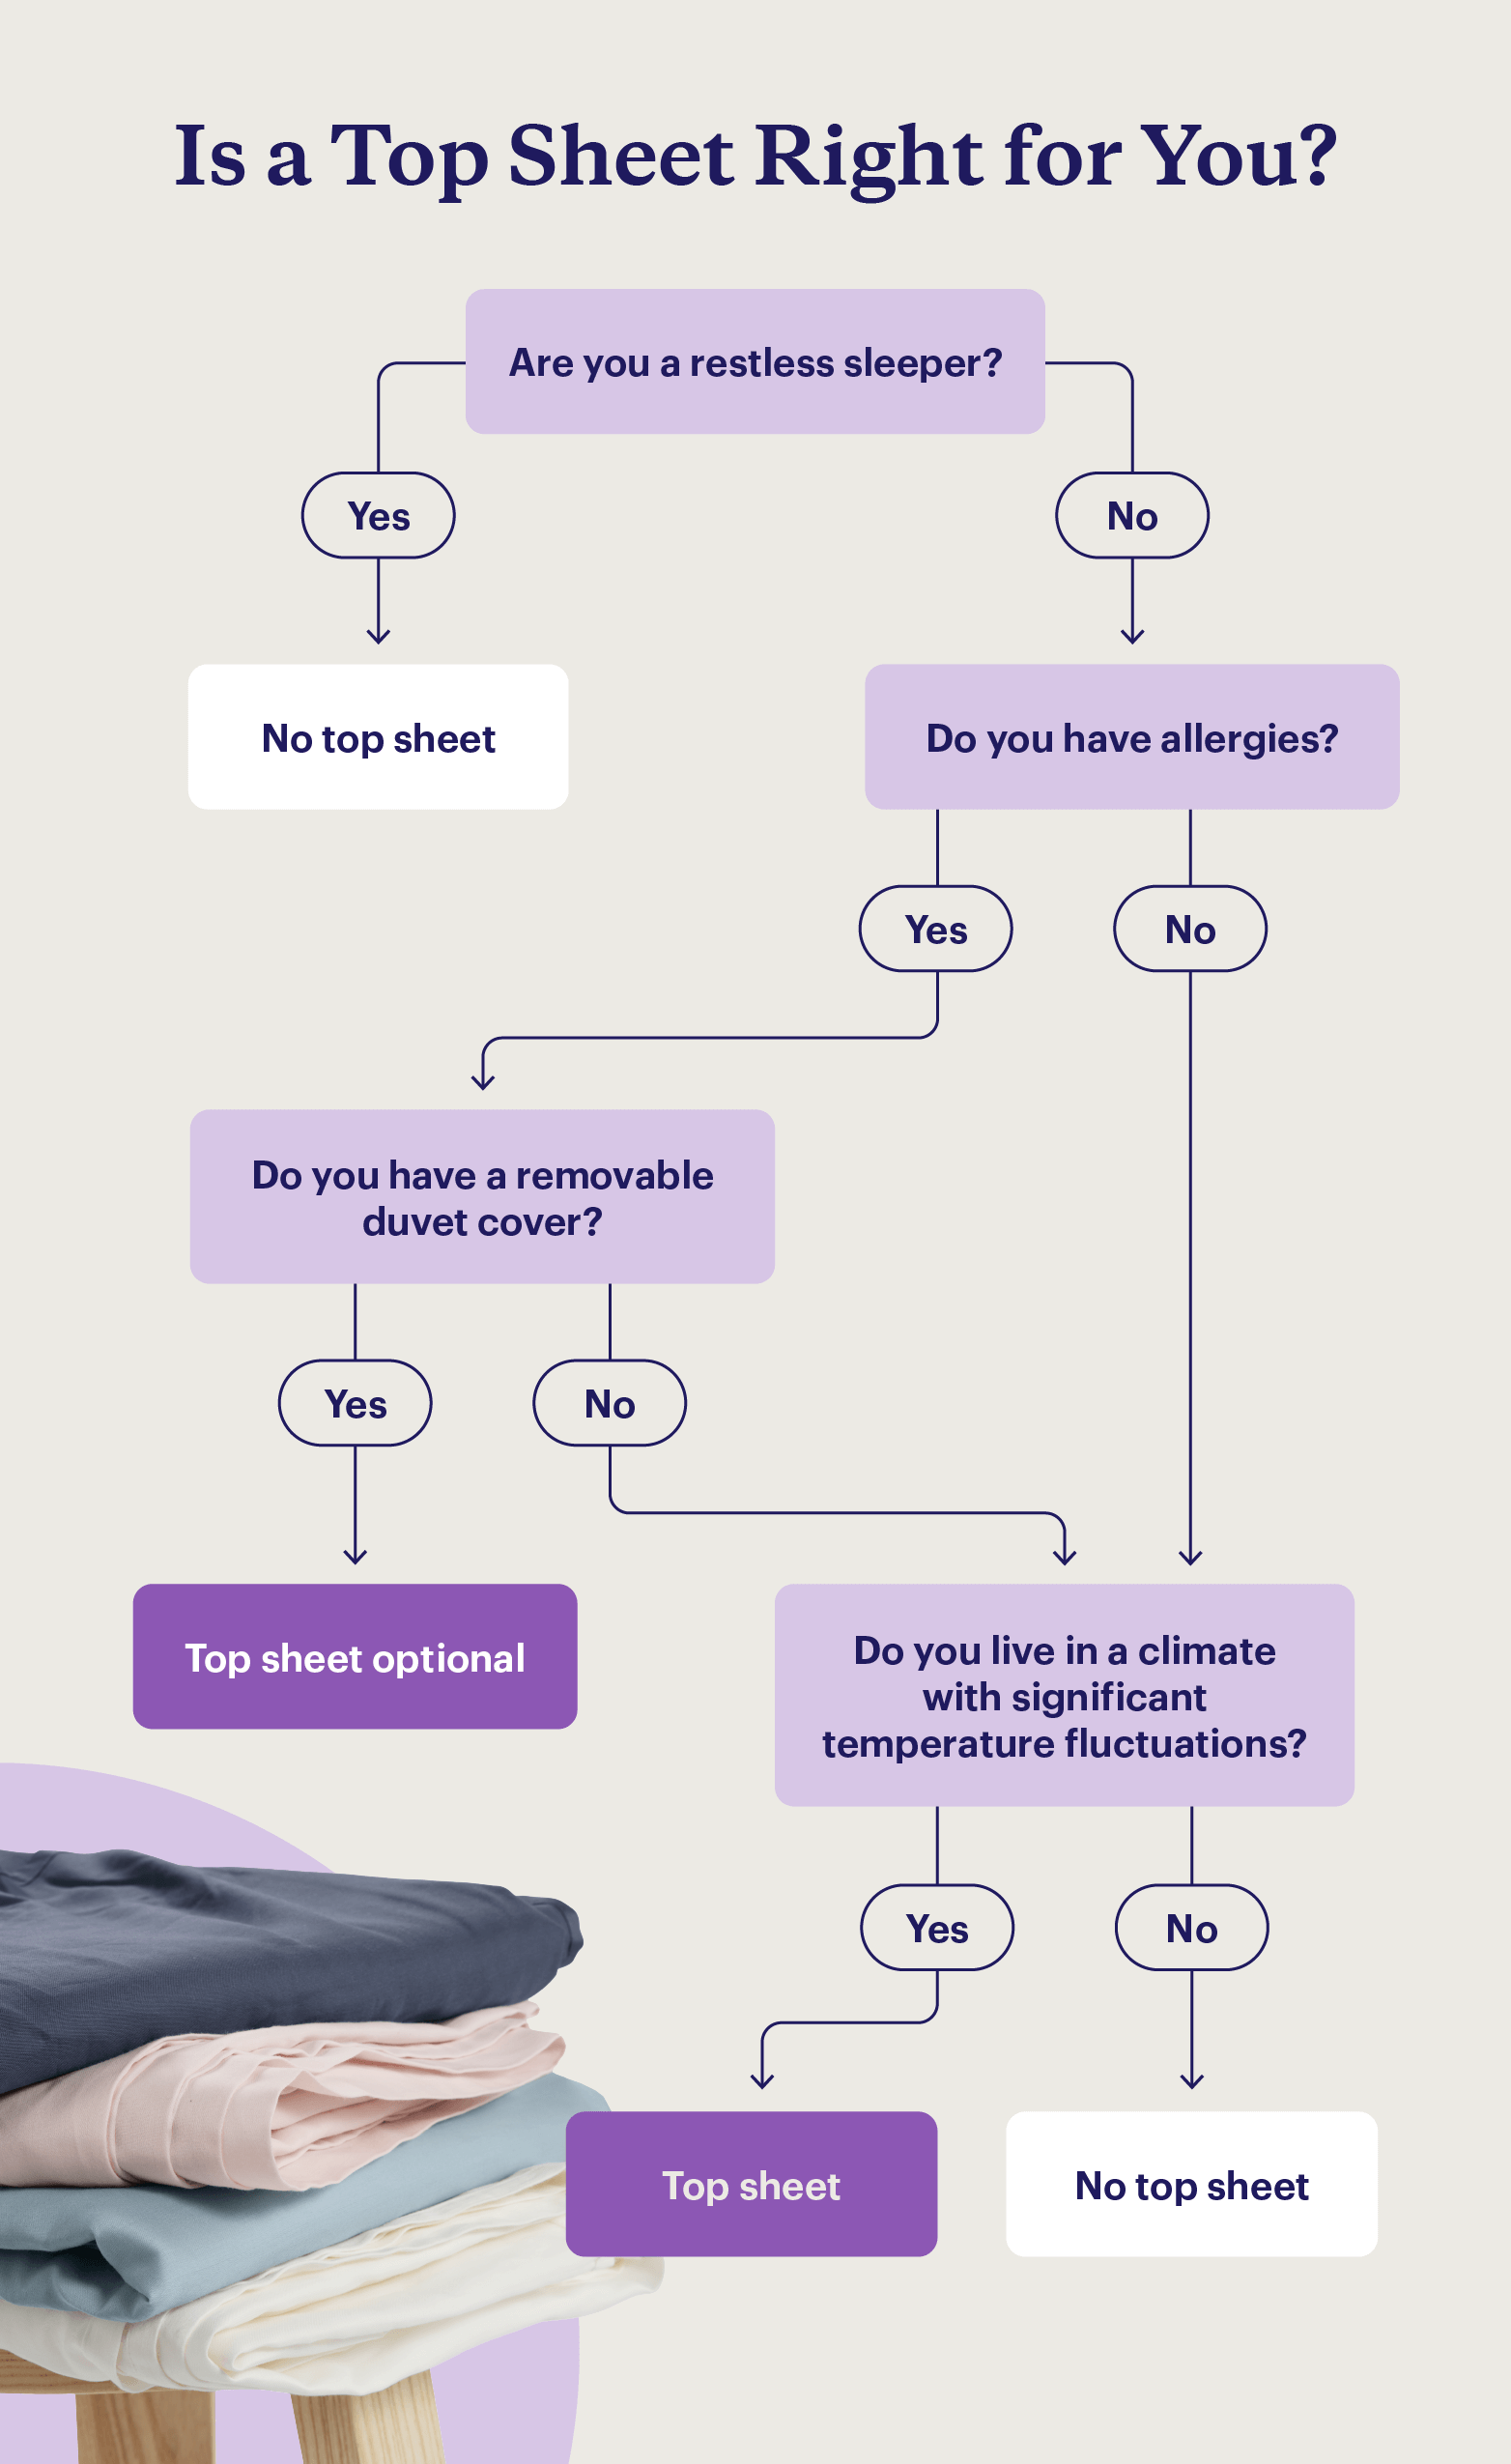 Flowchart determining if a top sheet is right for a sleeper.